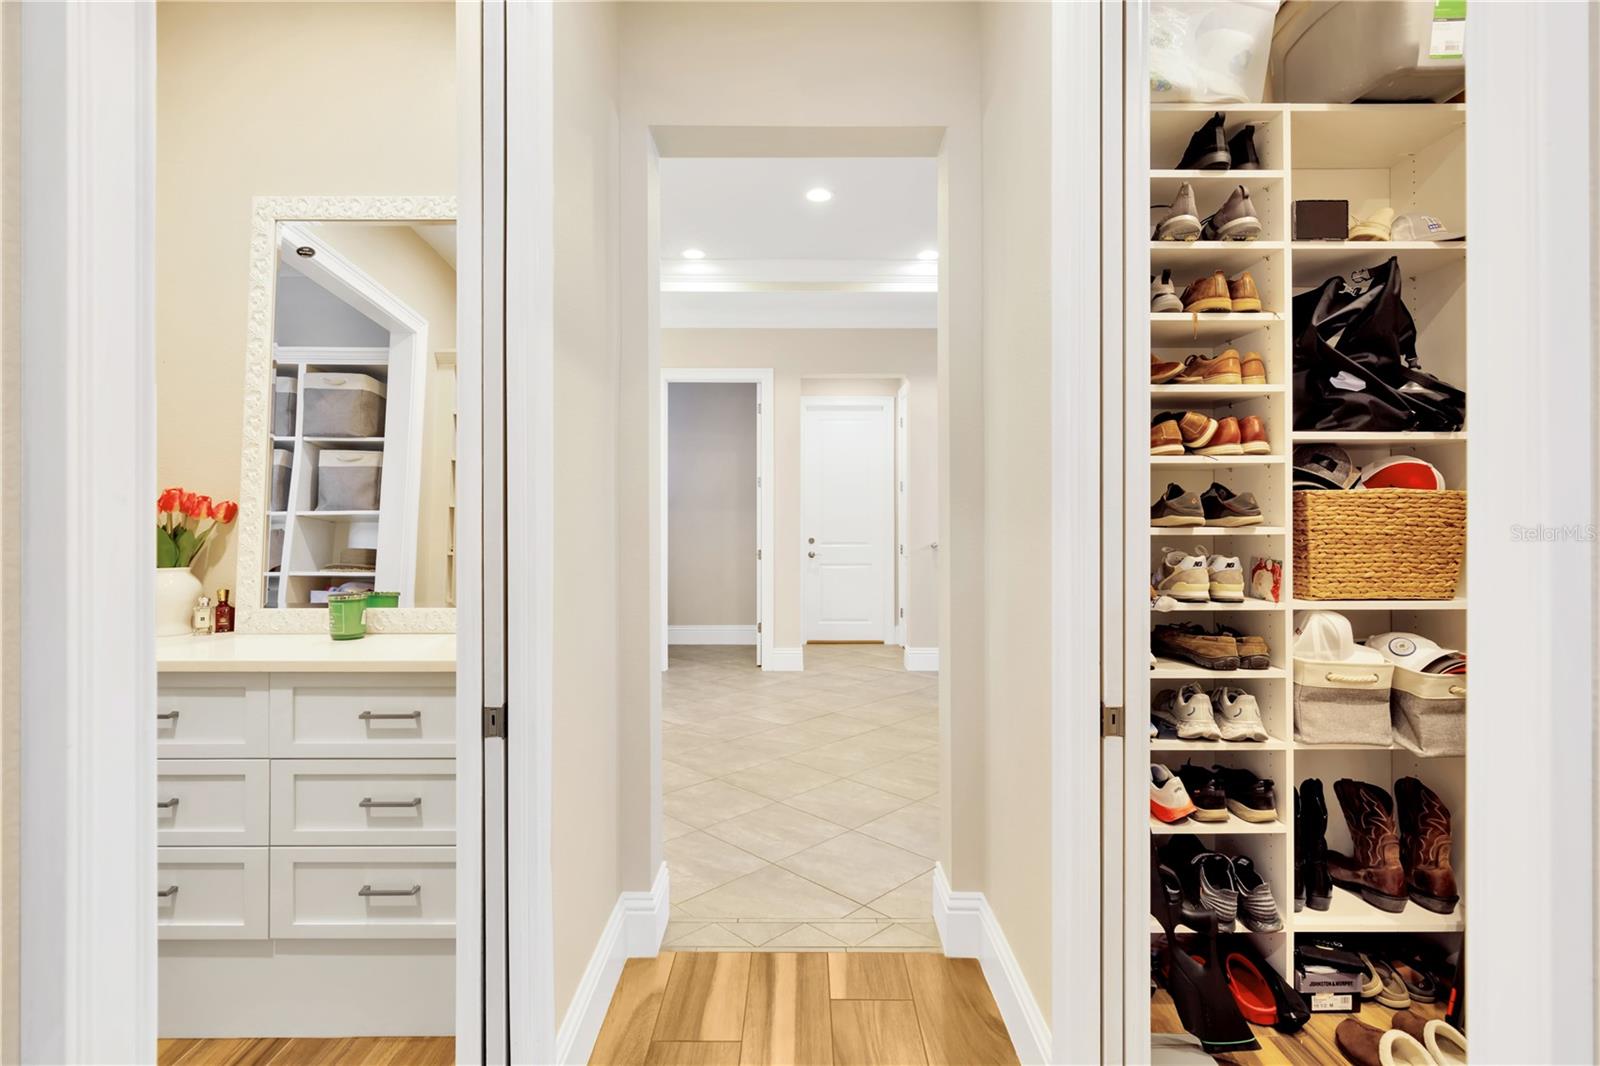 2 Walk-in Closets with Built-ins